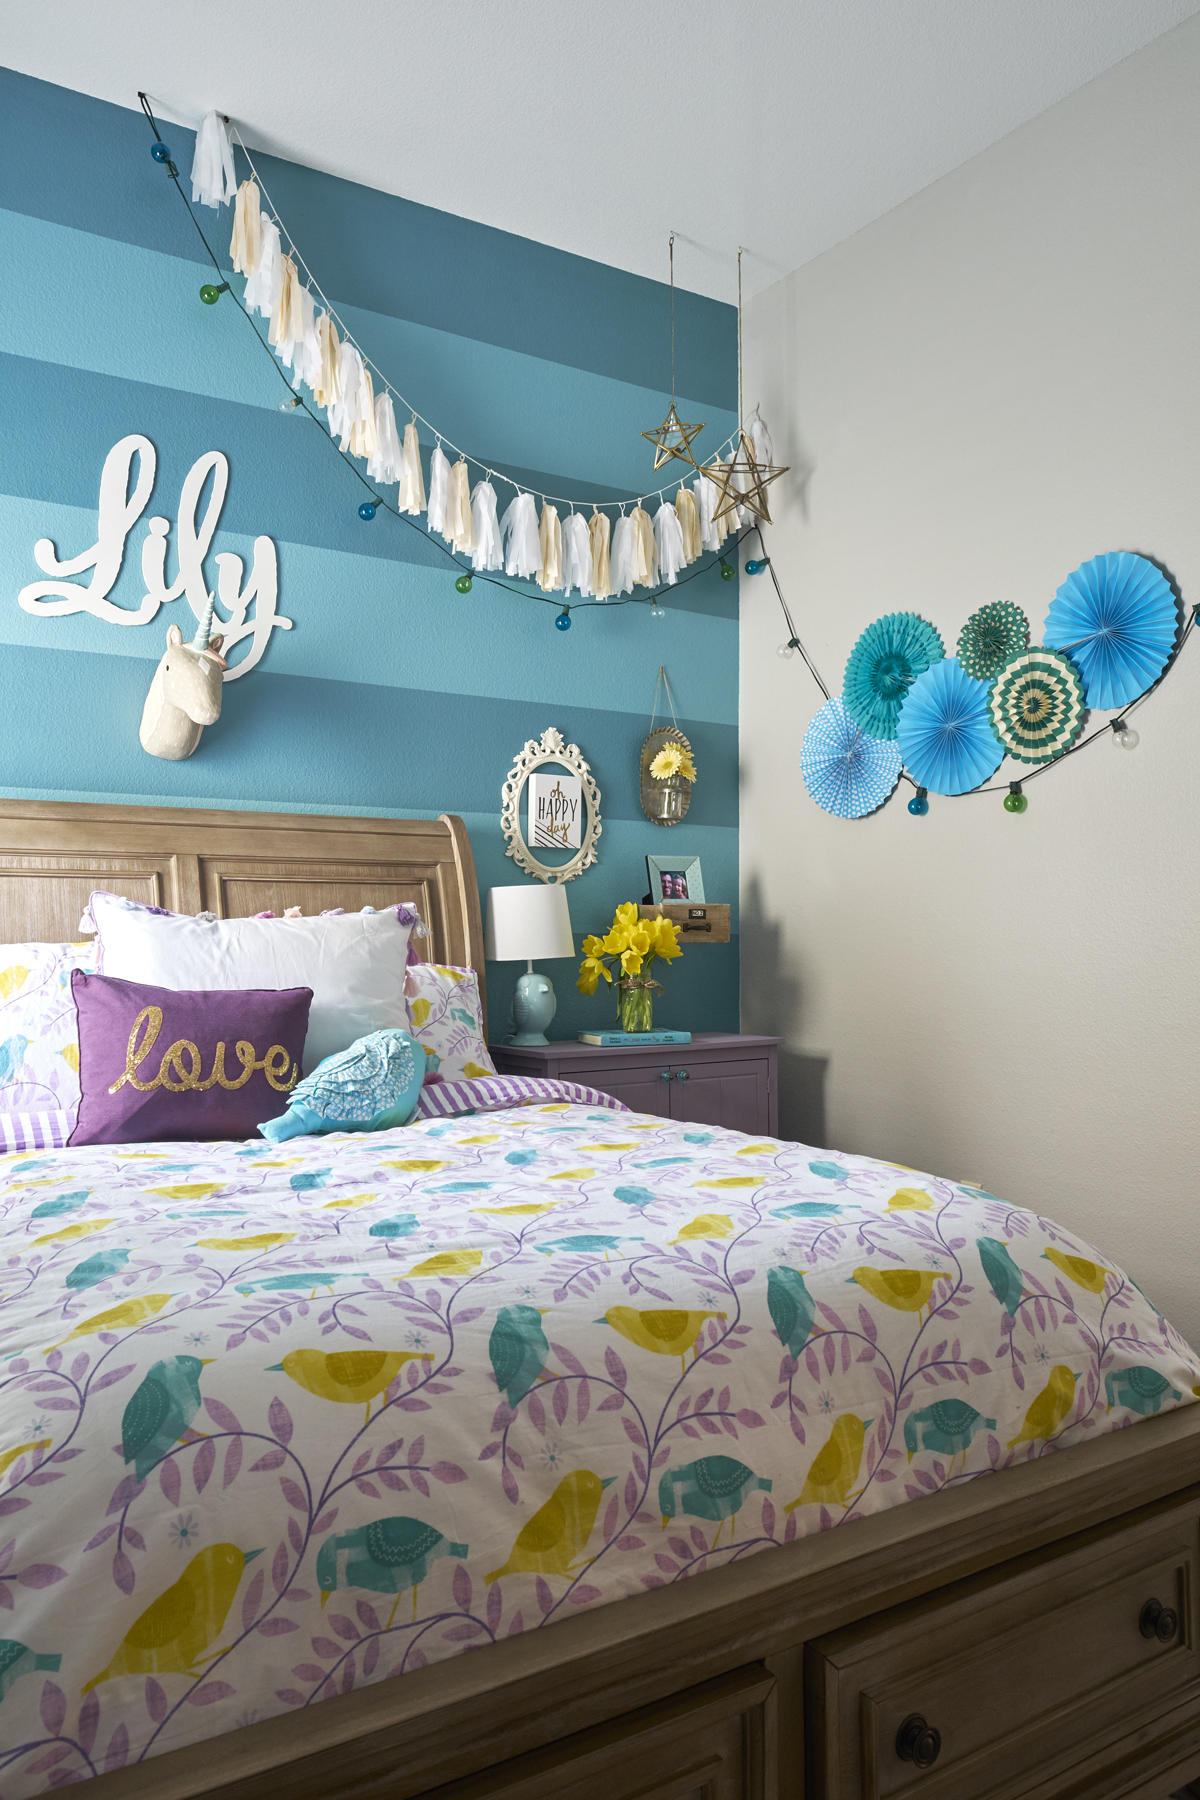 Kid's Room Decorating: Spaces that Grow With Them